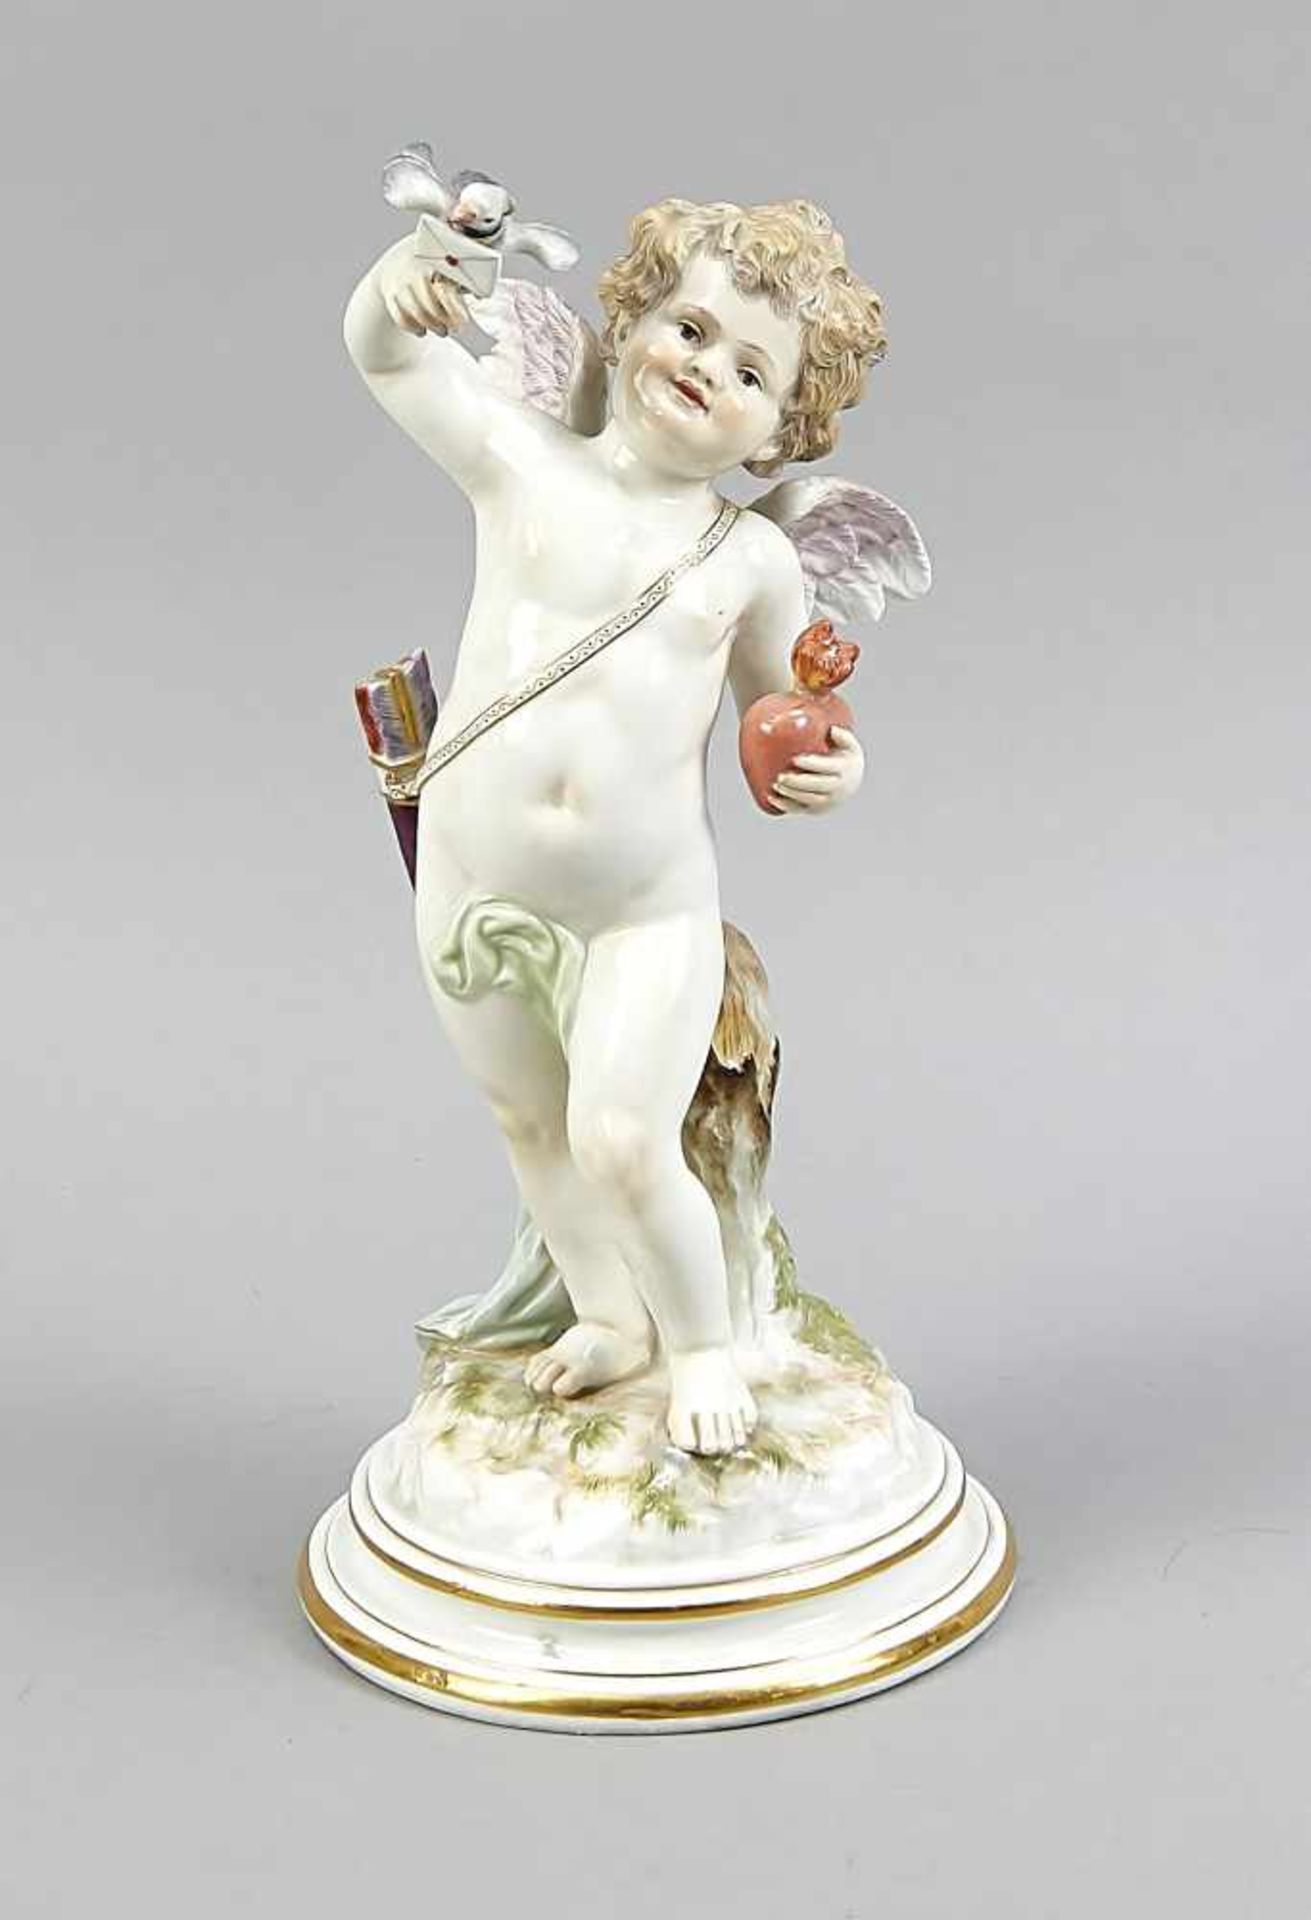 Large Cupid with Heart and Carrier Pigeon, Meissen, mark 1850-1924, 1st quality, designed